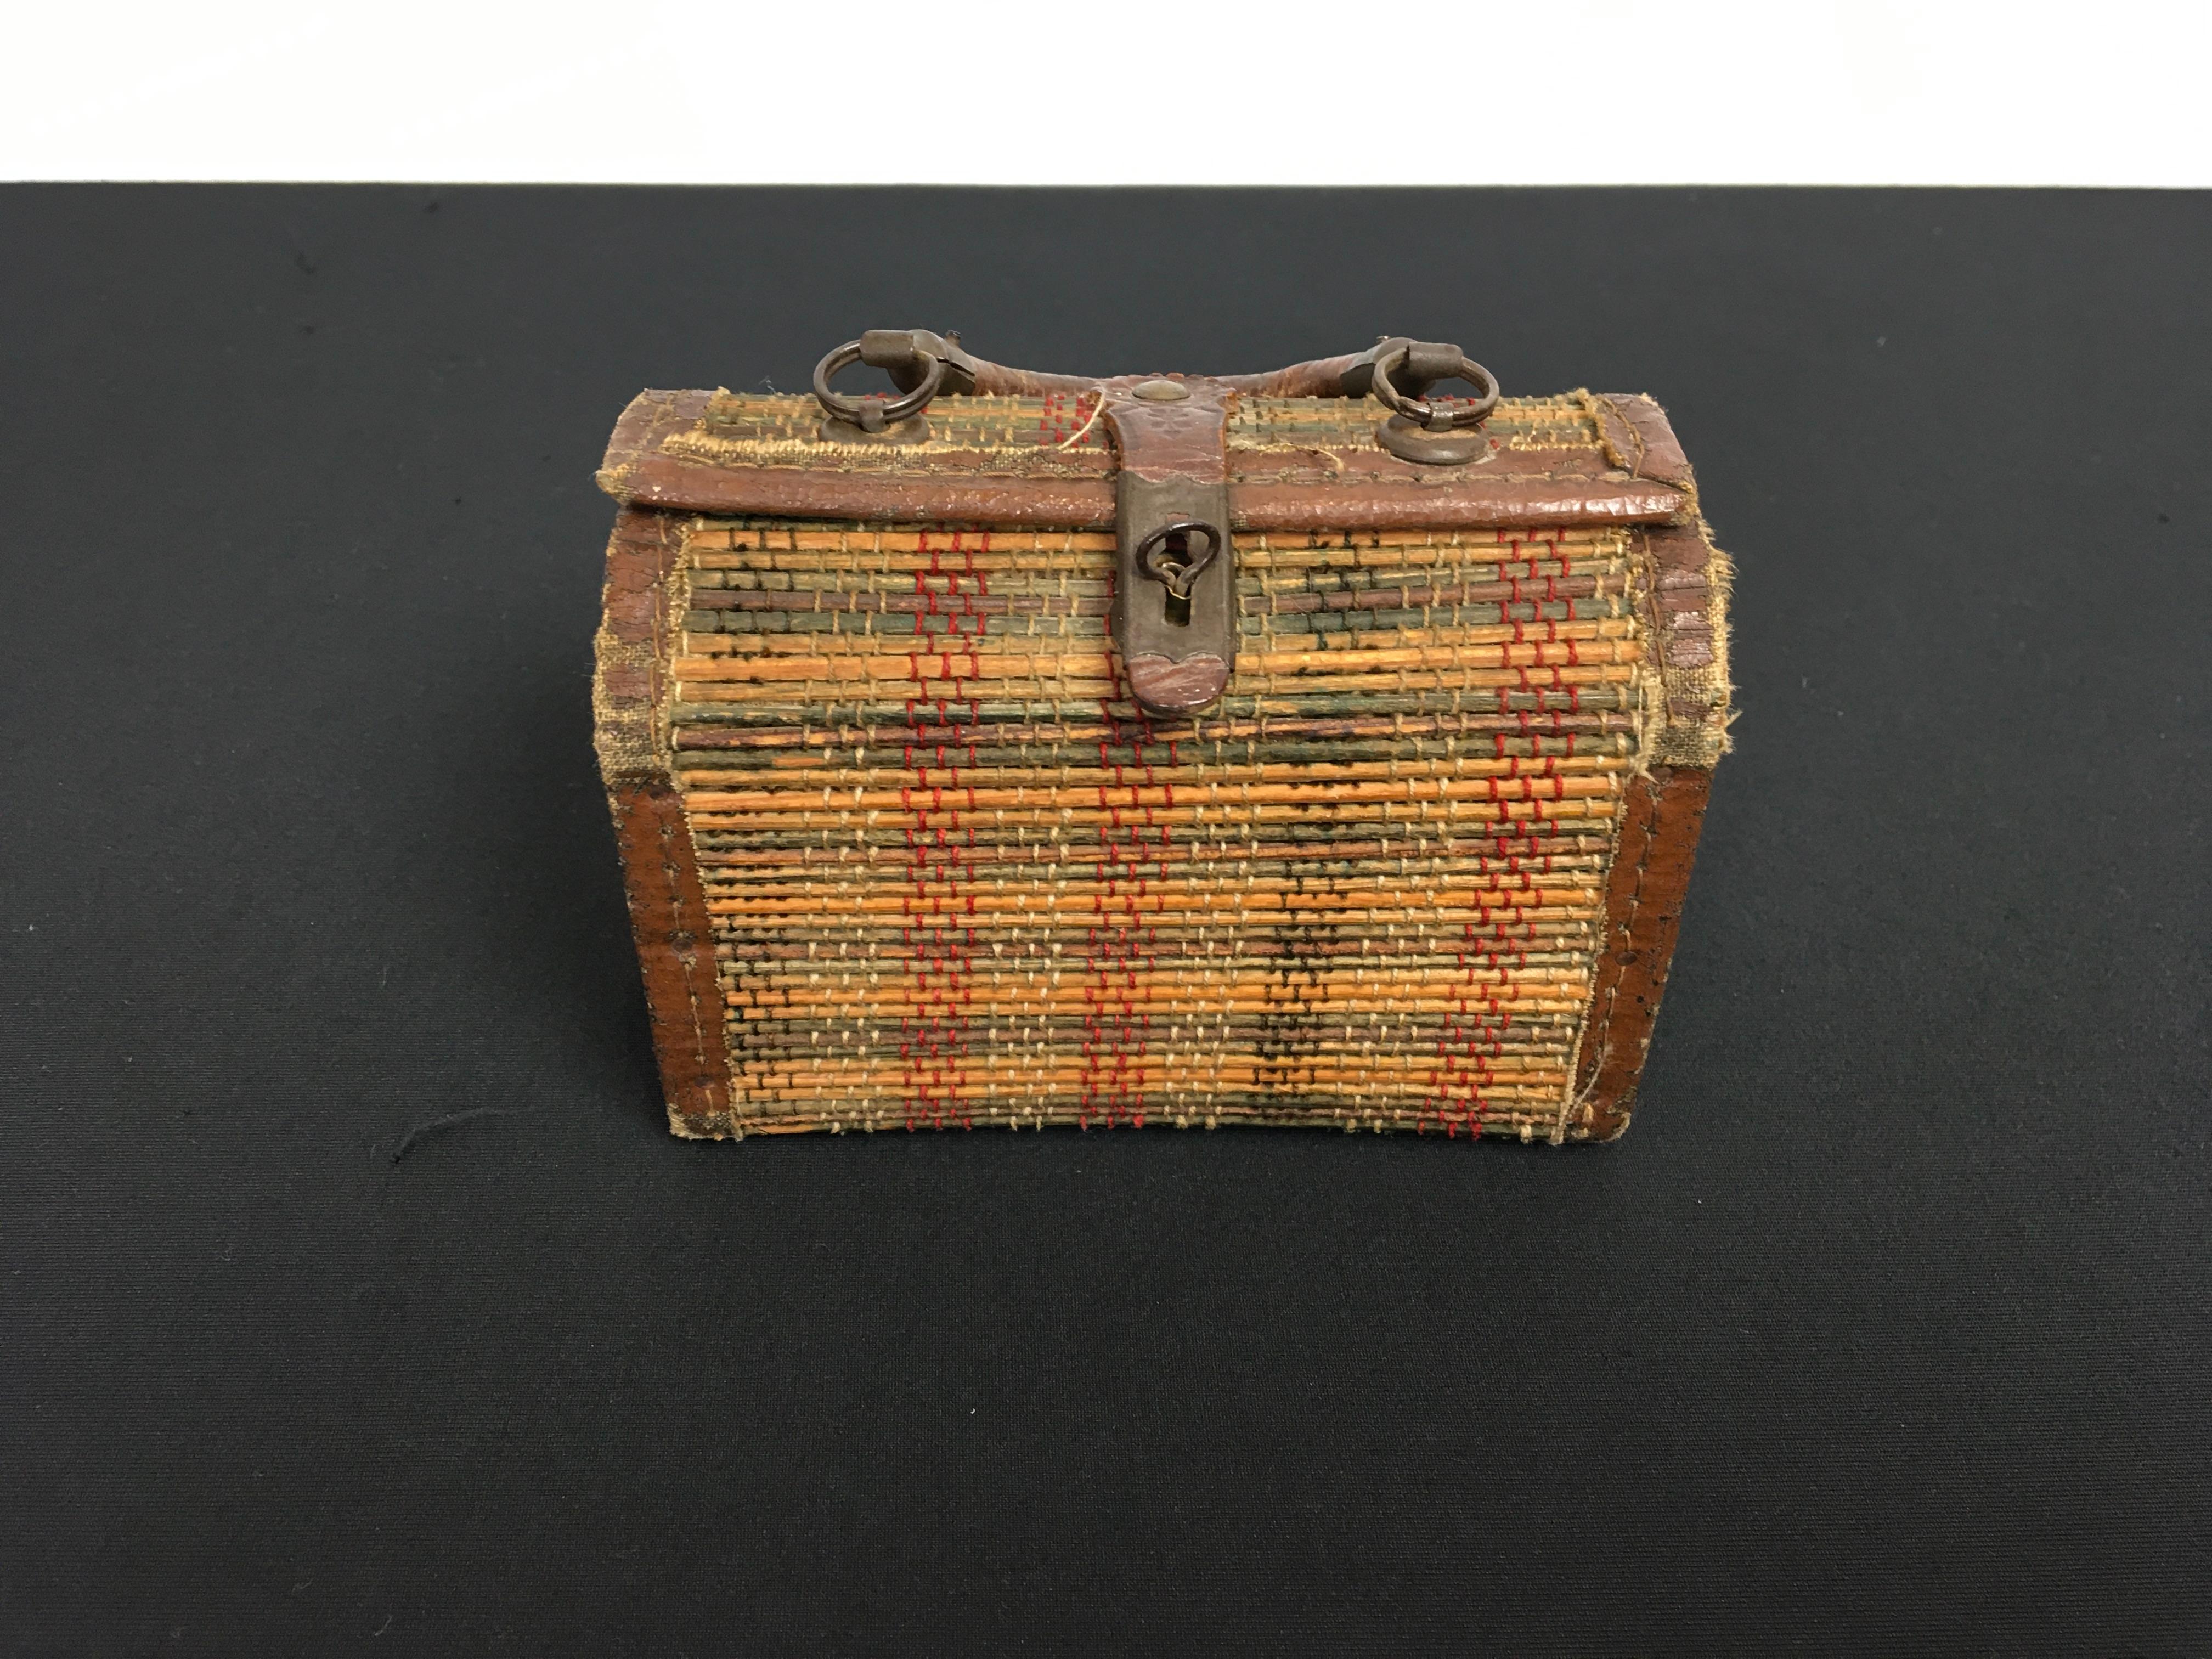 20th Century French Woven Colored Cane Mini Bag , Lunch Box, Suitcase, Handbasket For Sale